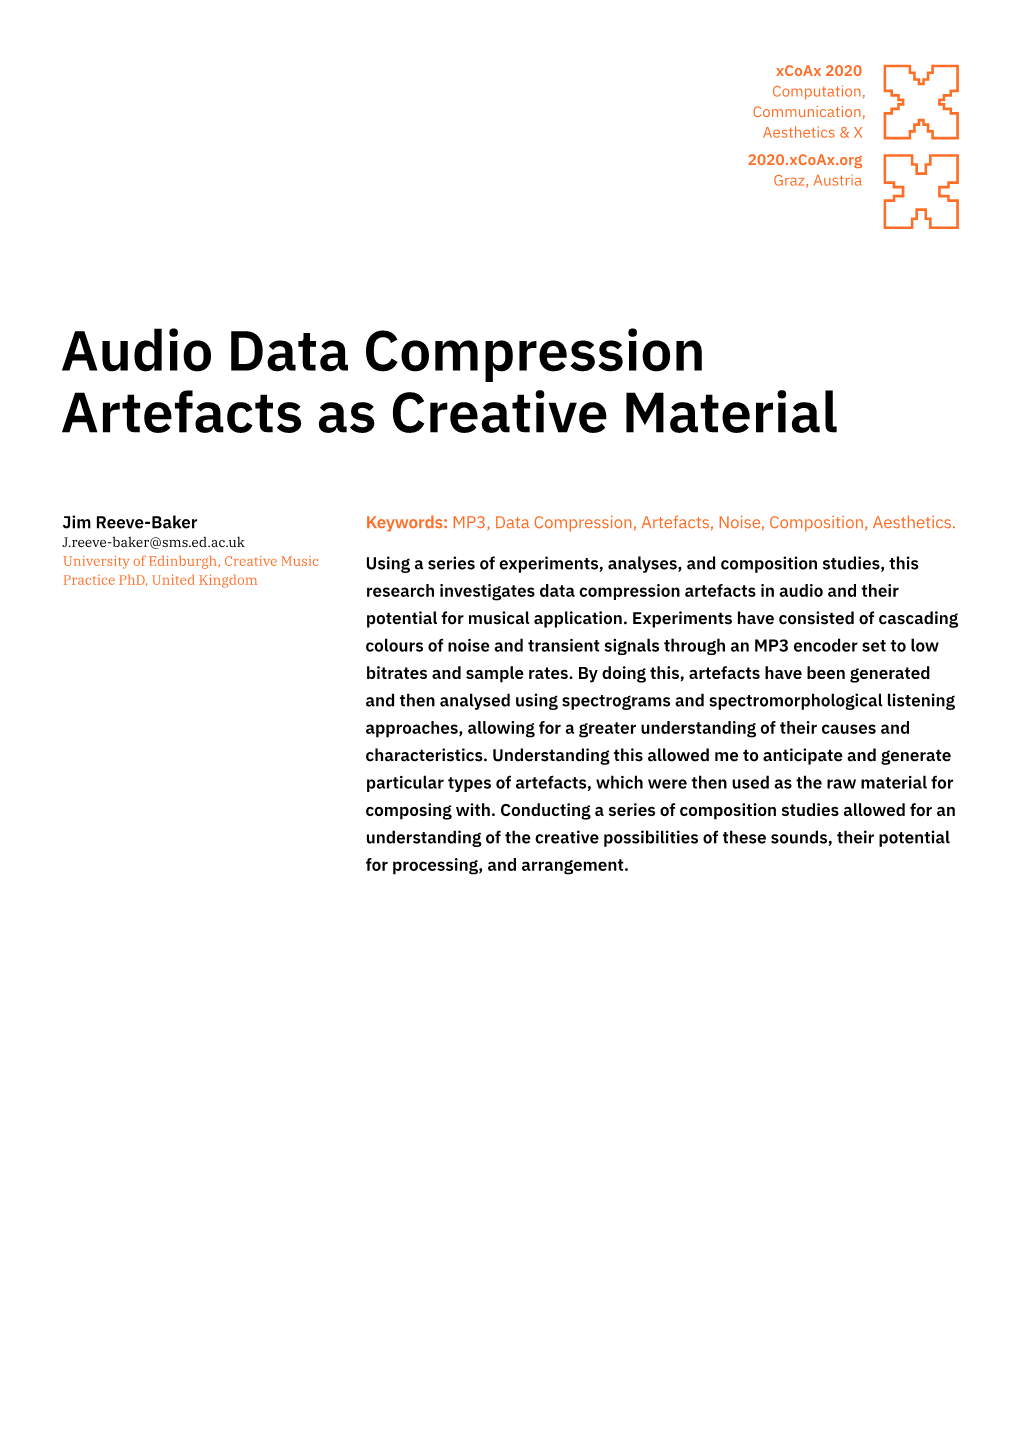 Audio Data Compression Artefacts As Creative Material